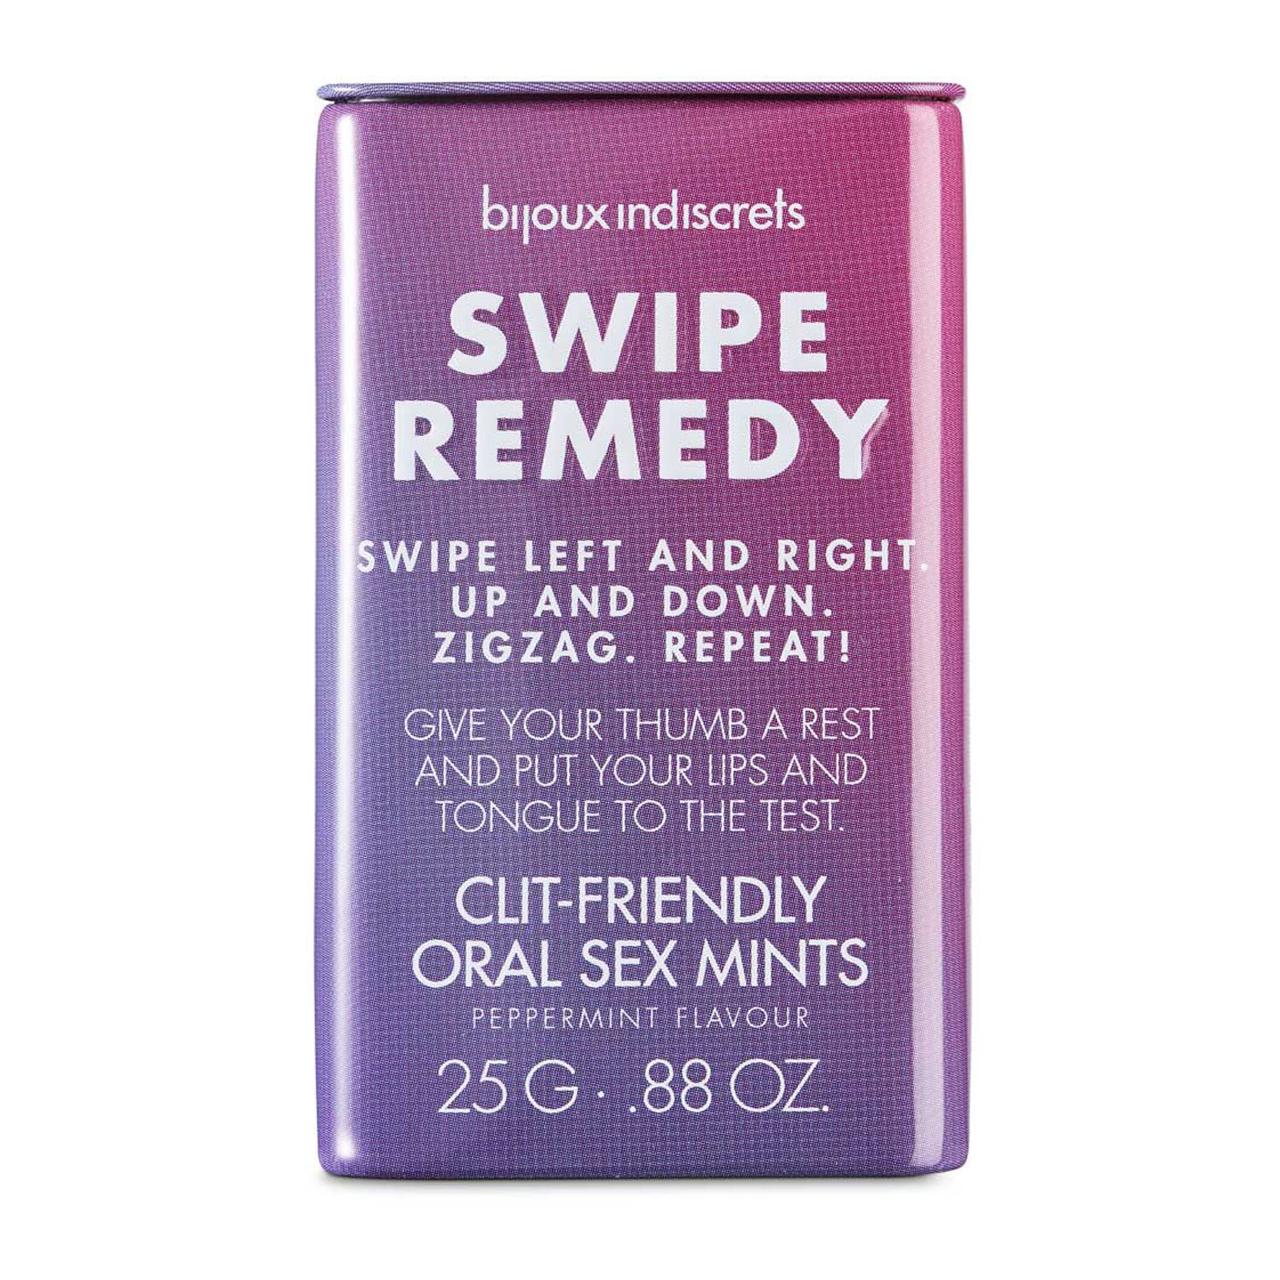 М'ятні цукерки Bijoux Indiscrets Swipe Remedy — clitherapy oral sex mints